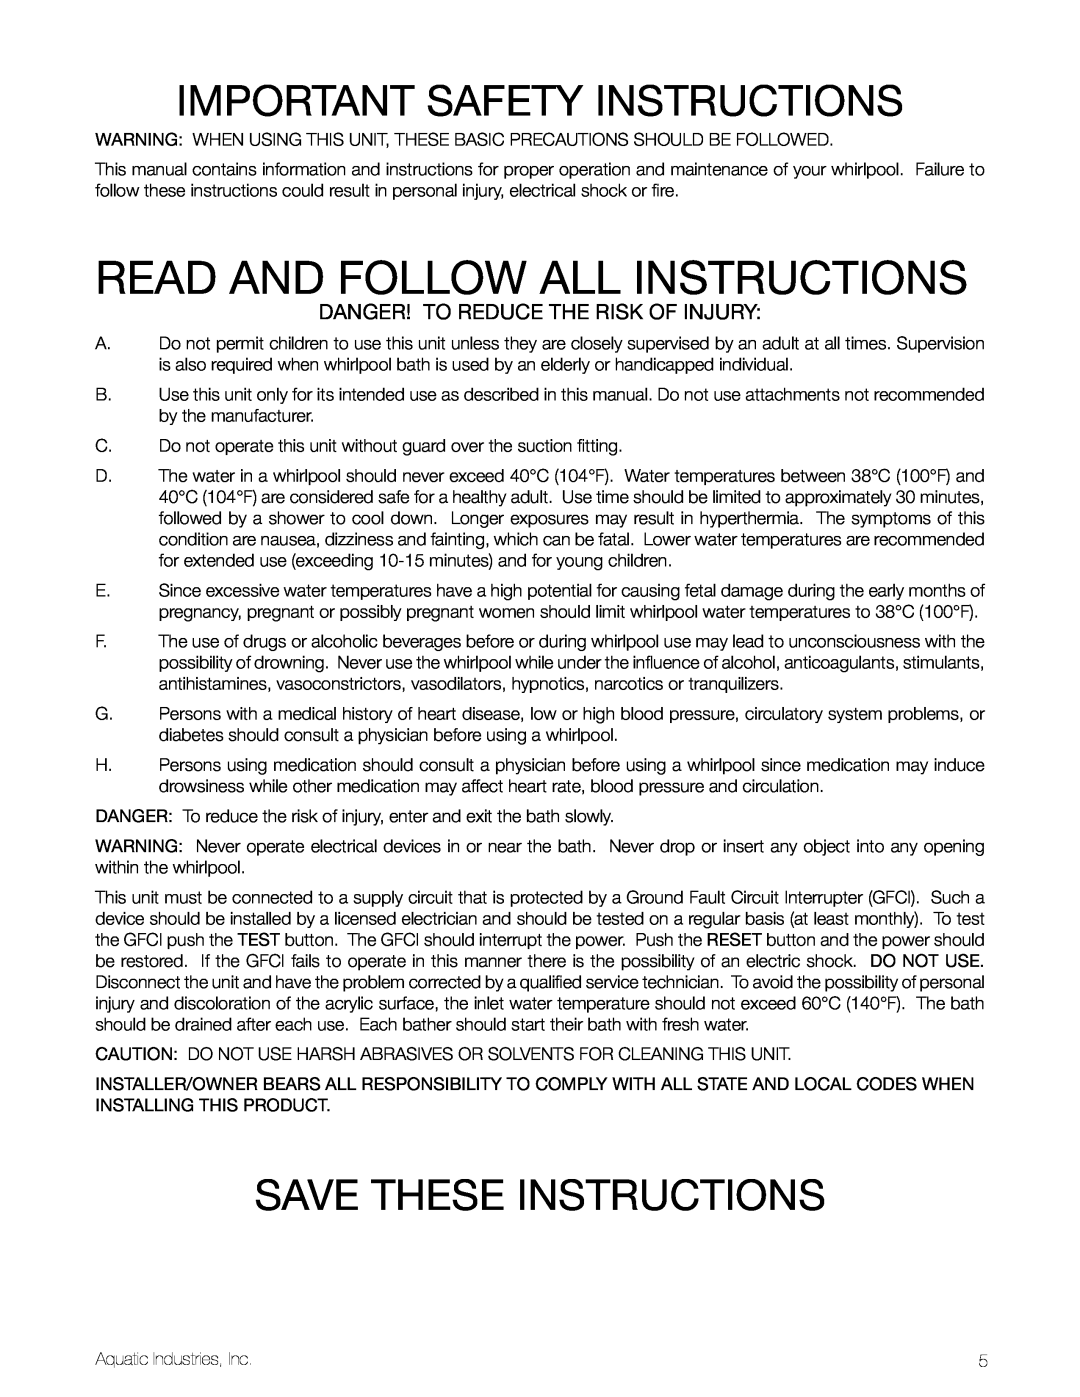 Aquatic LuxeAir Series Important Safety Instructions, Save These Instructions, Read And Follow All Instructions 